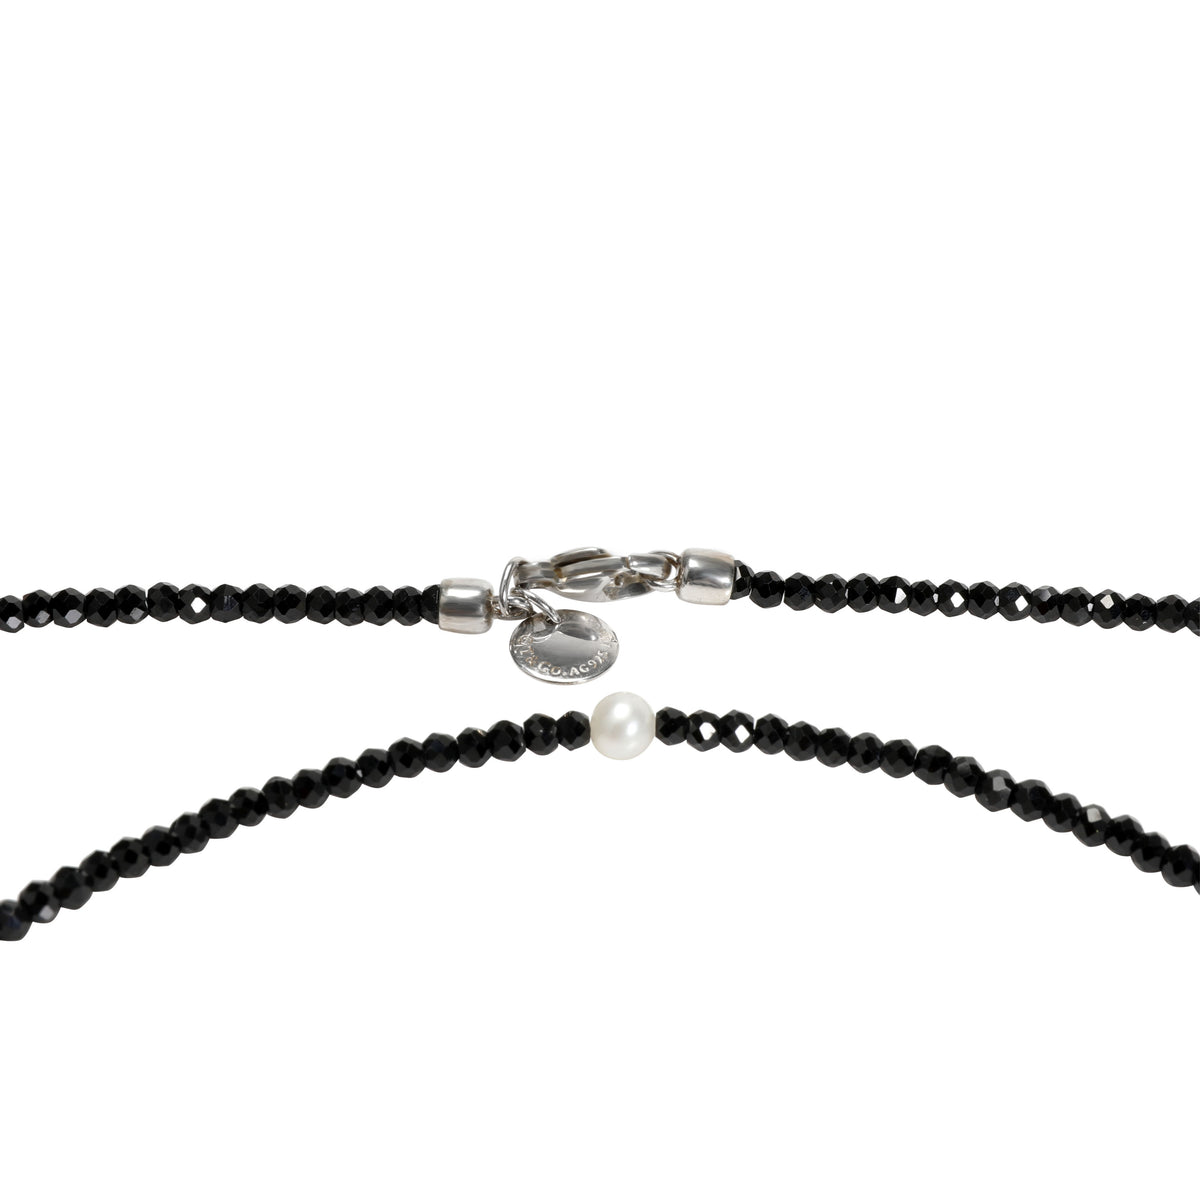 Tiffany Faceted Black Spinel & Freshwater Pearl Necklace in Sterling Silver